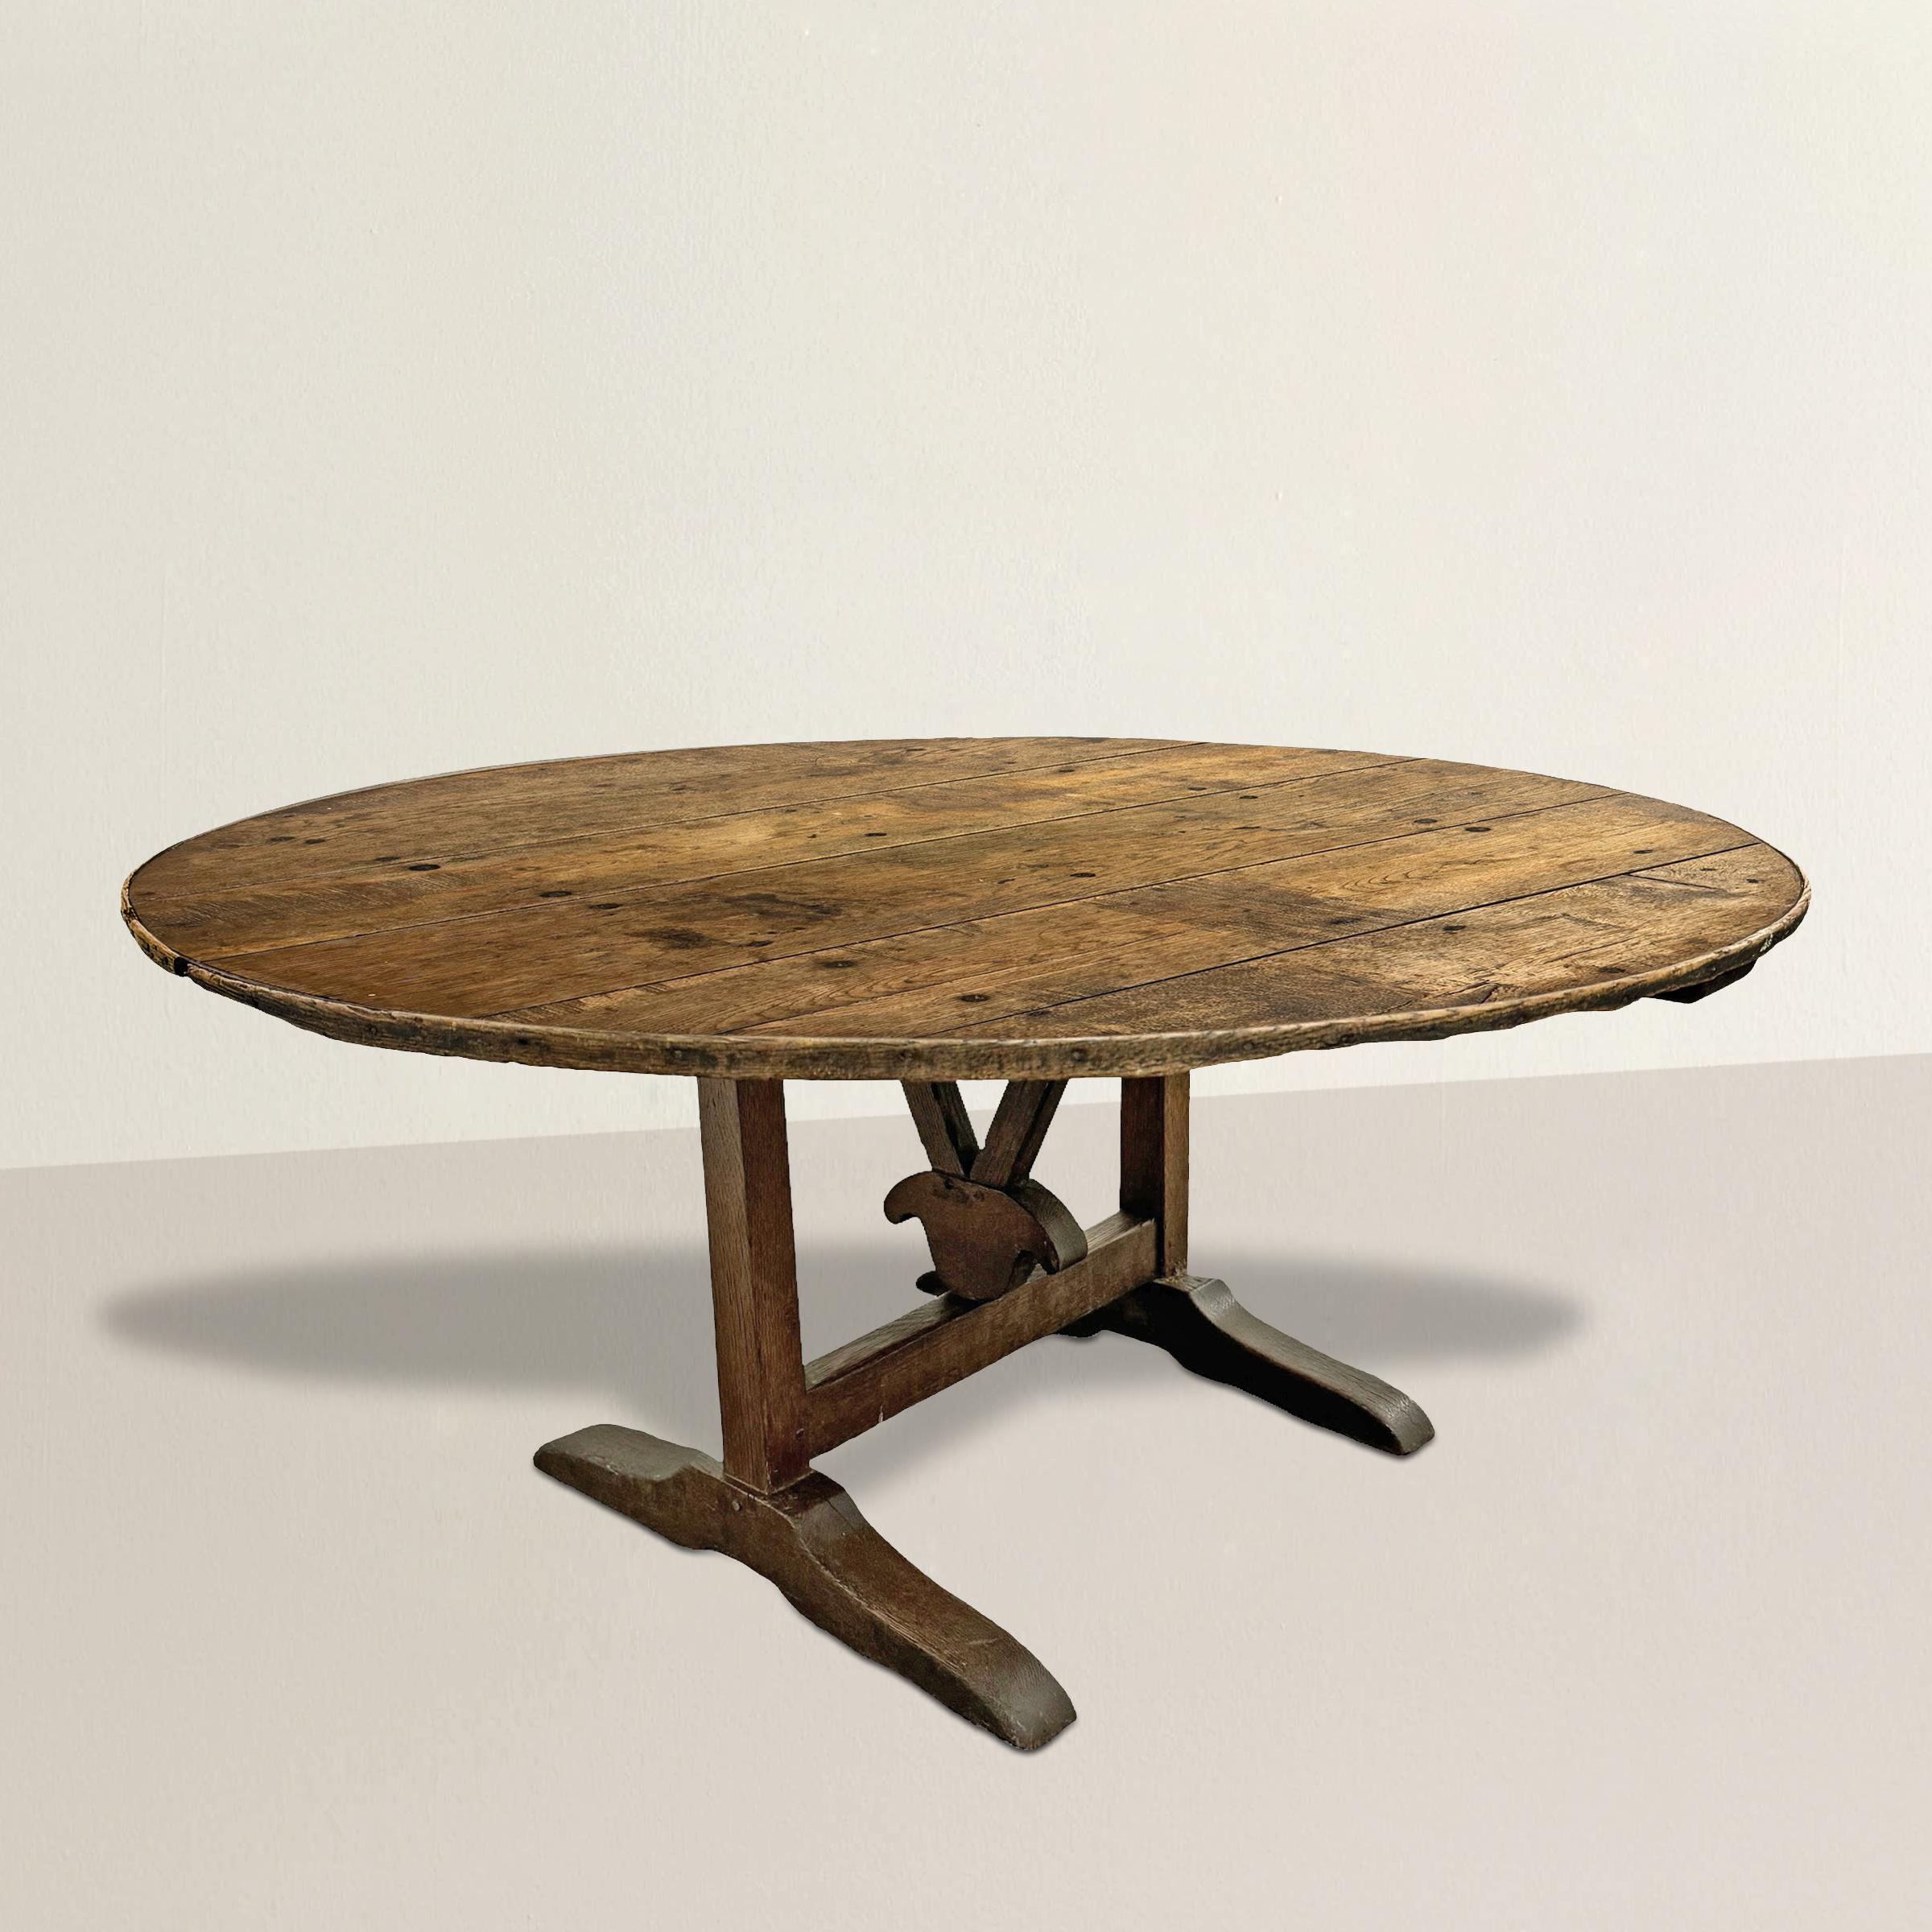 This 19th-century French oak vintner's table carries with it a rich history of winemaking tradition. Originally used in a vineyard for tasting wines, this table has been repurposed and transformed into a functional and versatile piece for modern